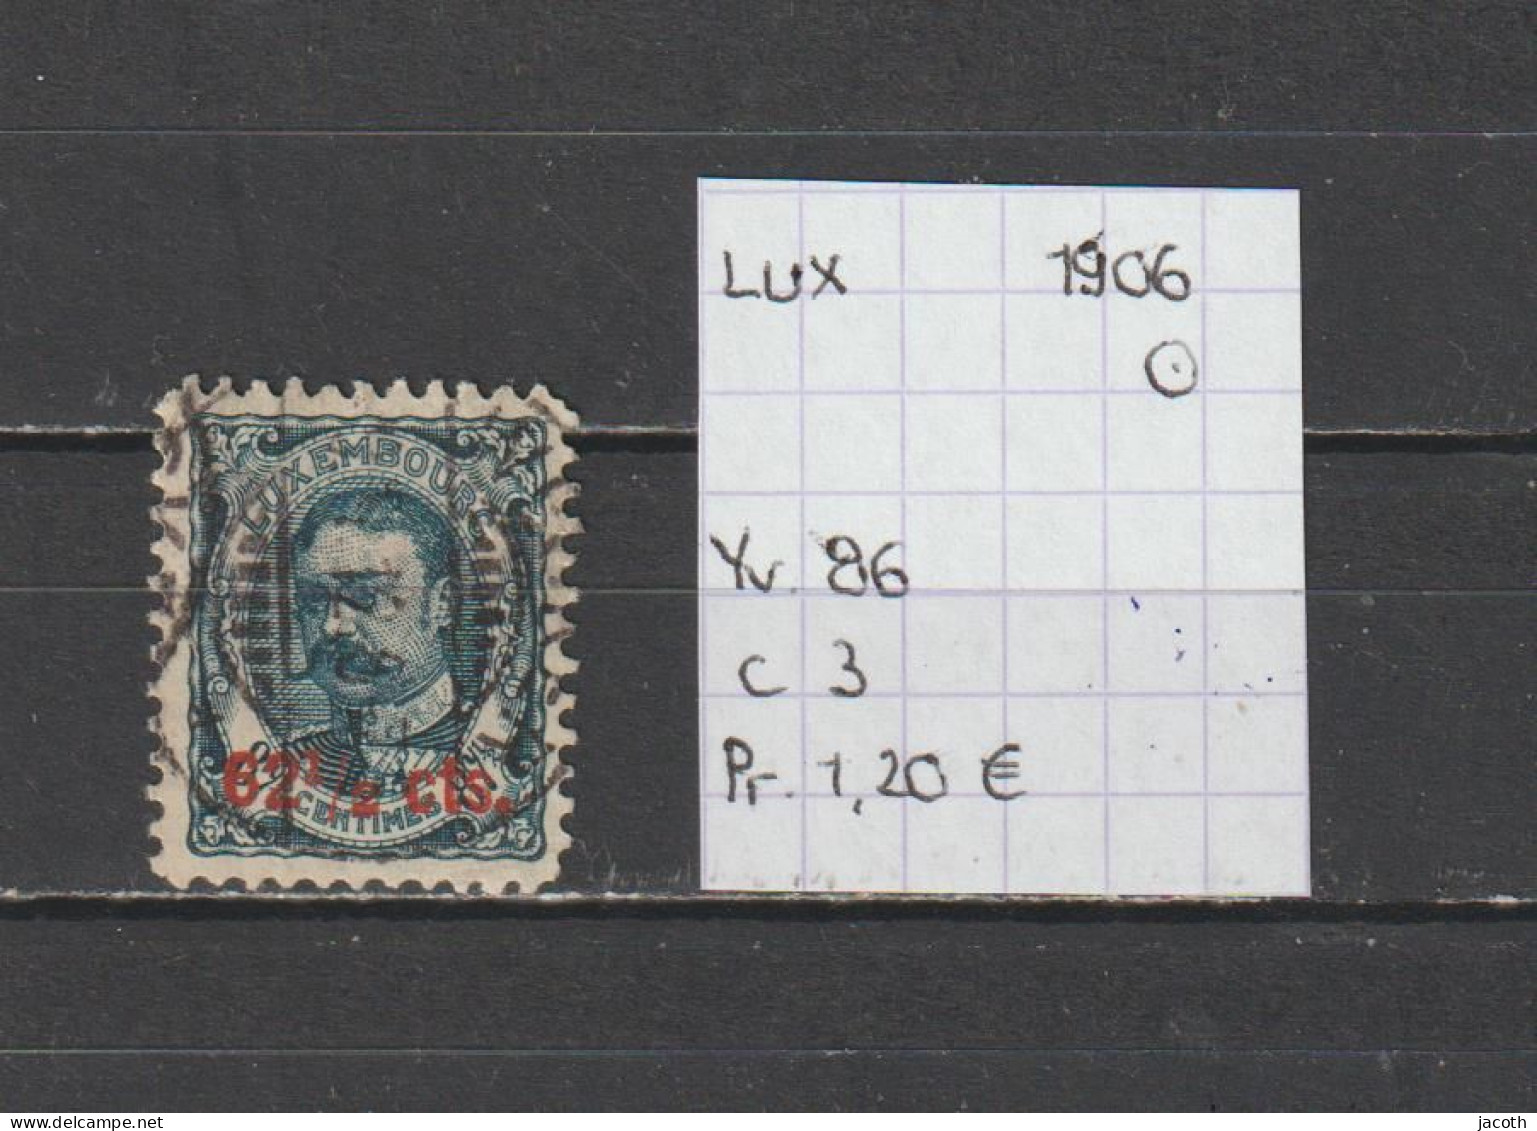 (TJ) Luxembourg 1906 - YT 86 (gest./obl./used) - 1906 William IV